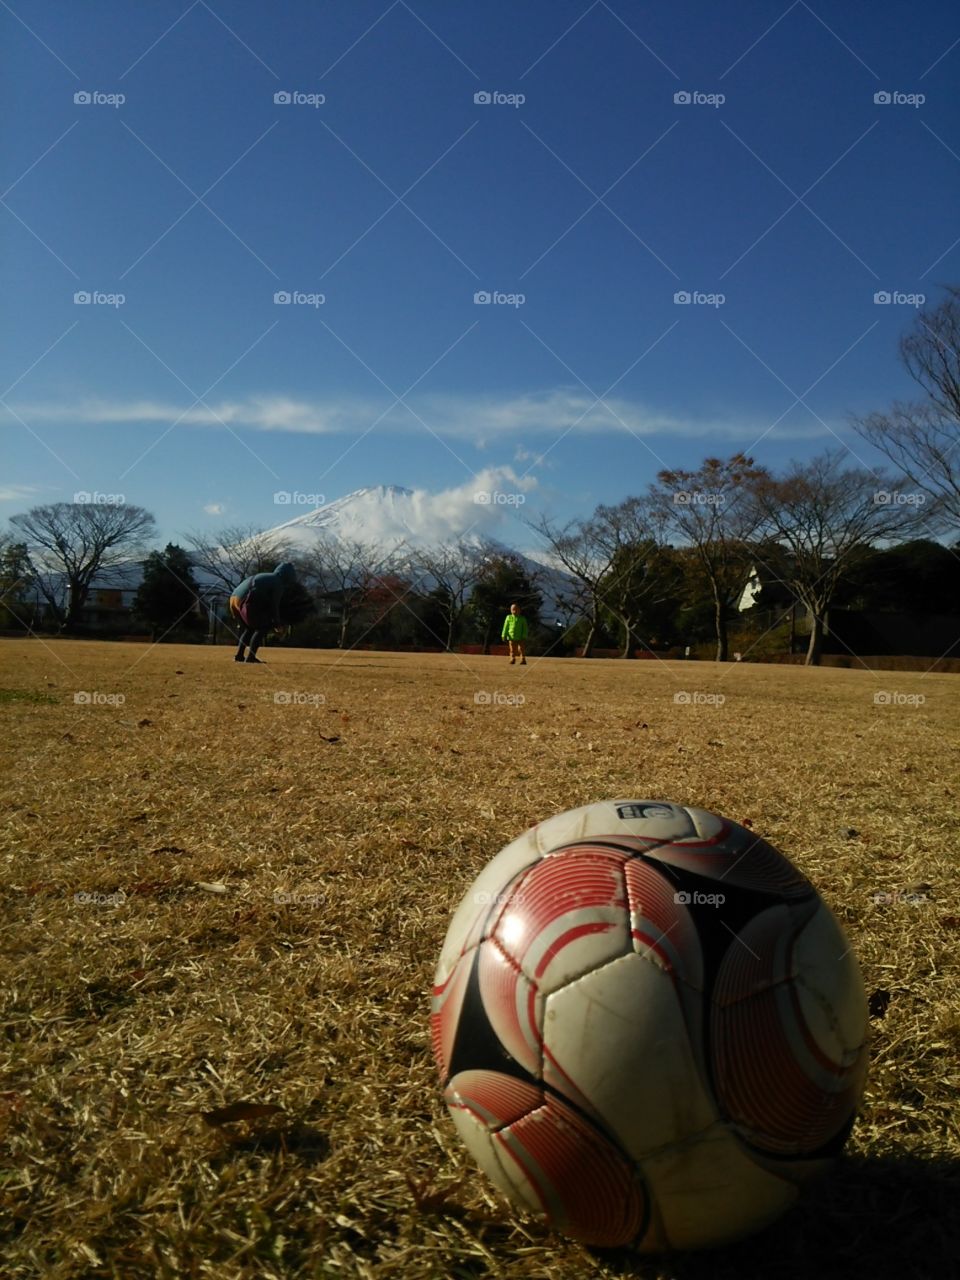 Mt.Fuji in fall with soccer